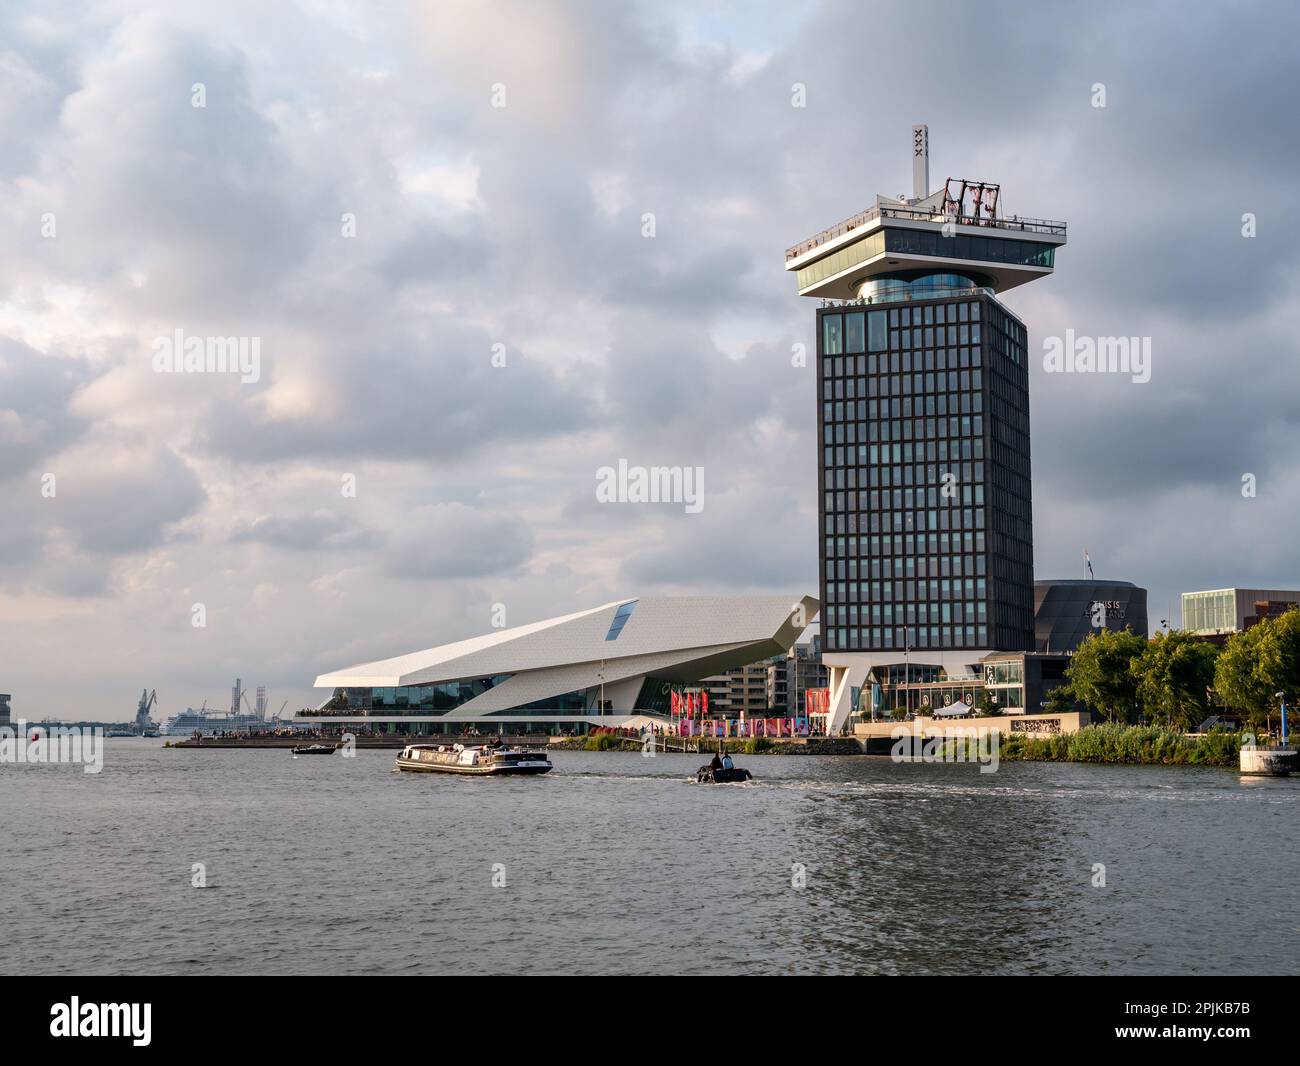 Adam Tower, Eye Filmmuseum and boats on River IJ in Amsterdam, Netherlands Stock Photo